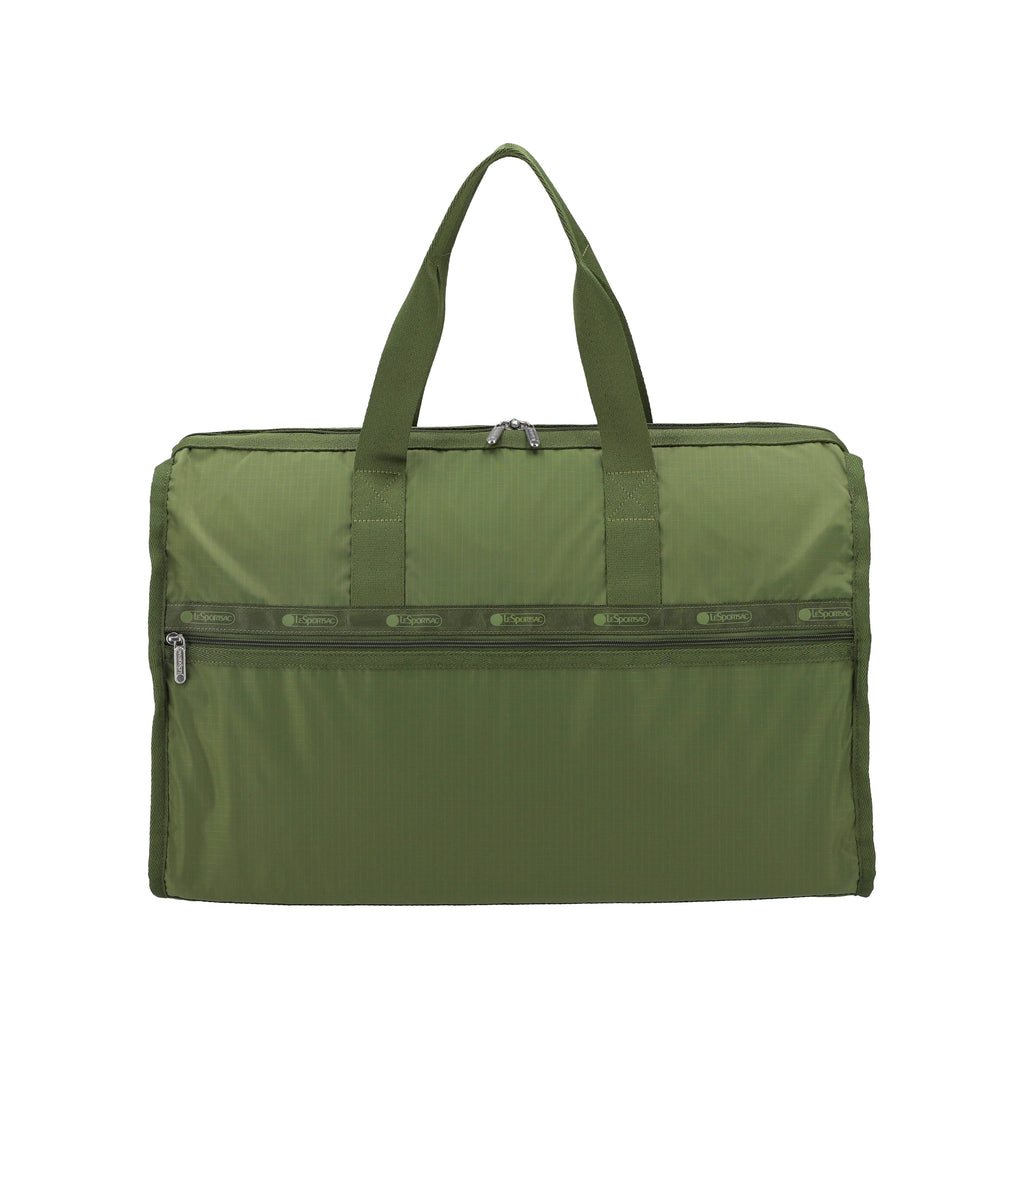 Deluxe Large Weekender - Olive solid – LeSportsac